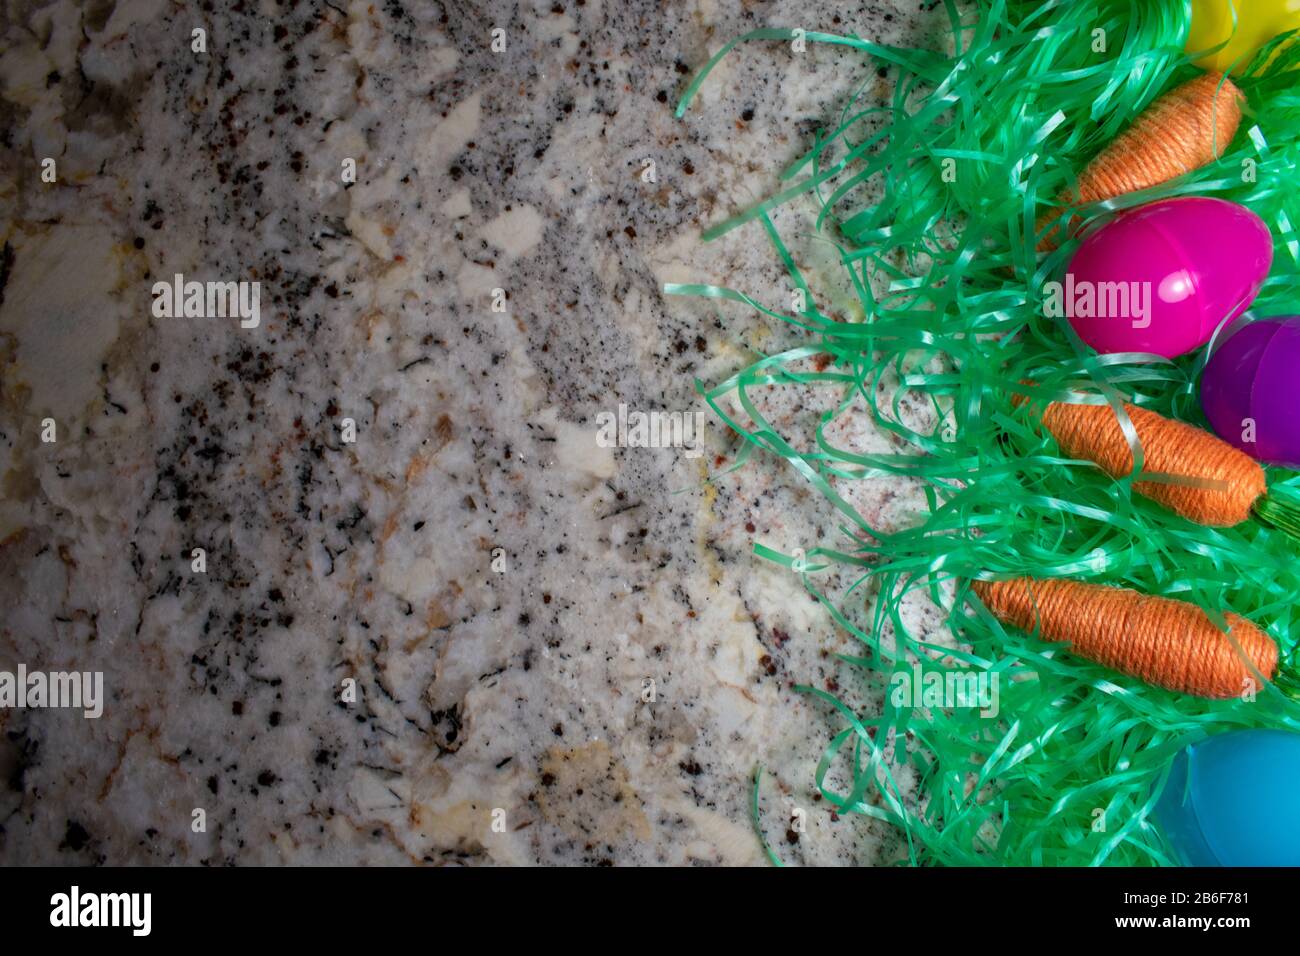 An Easter Flat Lay With Easter Grass, Carrots, and Eggs on a Granite Counter Top With Copy Space Stock Photo